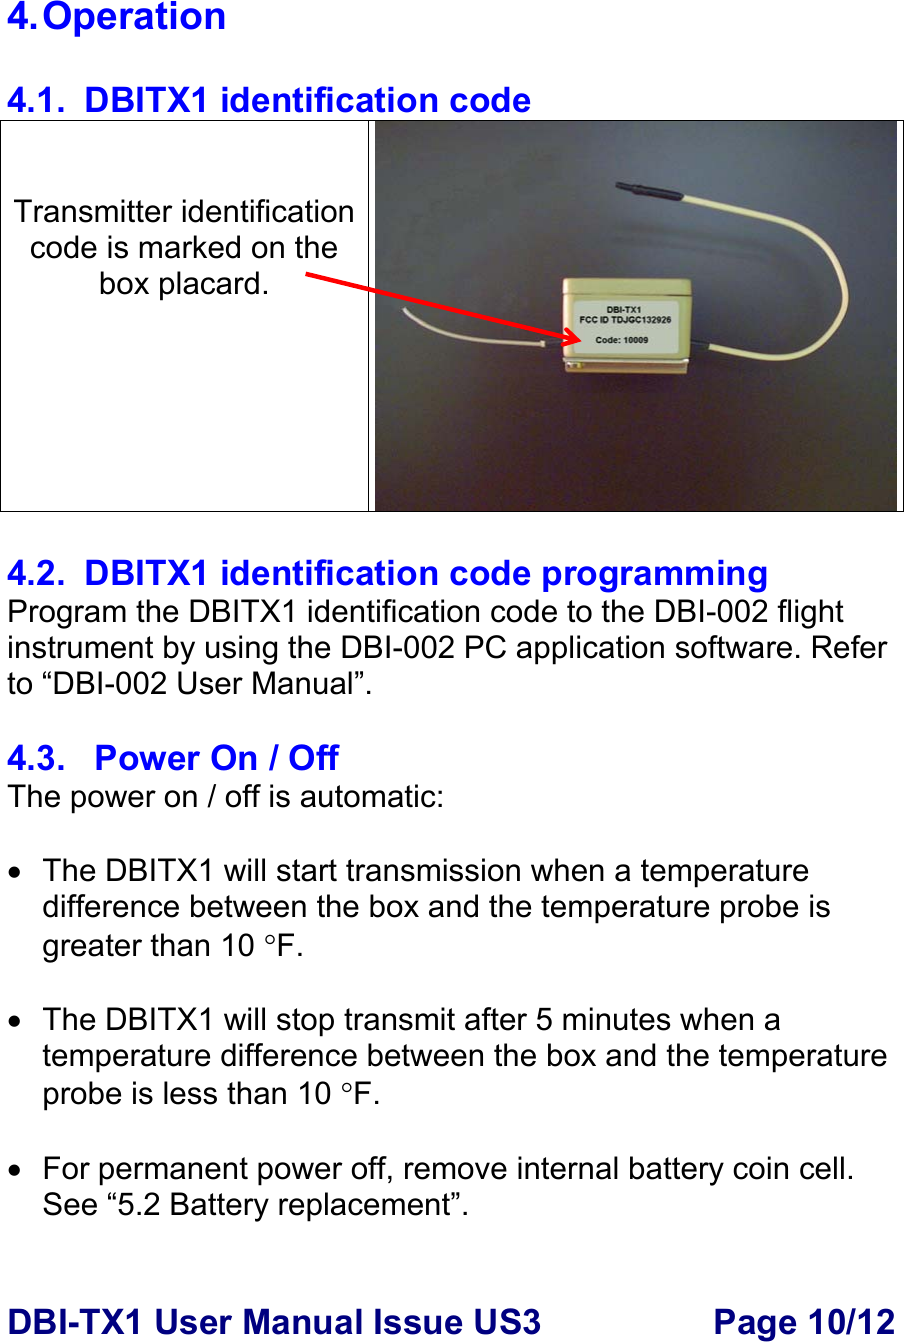 DBI-TX1 User Manual Issue US3  Page 10/12  4. Operation  4.1.  DBITX1 identification code   Transmitter identification code is marked on the box placard.  4.2.  DBITX1 identification code programming Program the DBITX1 identification code to the DBI-002 flight instrument by using the DBI-002 PC application software. Refer to “DBI-002 User Manual”.     4.3.   Power On / Off The power on / off is automatic:  •  The DBITX1 will start transmission when a temperature difference between the box and the temperature probe is greater than 10 °F.   •  The DBITX1 will stop transmit after 5 minutes when a temperature difference between the box and the temperature probe is less than 10 °F.  •  For permanent power off, remove internal battery coin cell. See “5.2 Battery replacement”.   